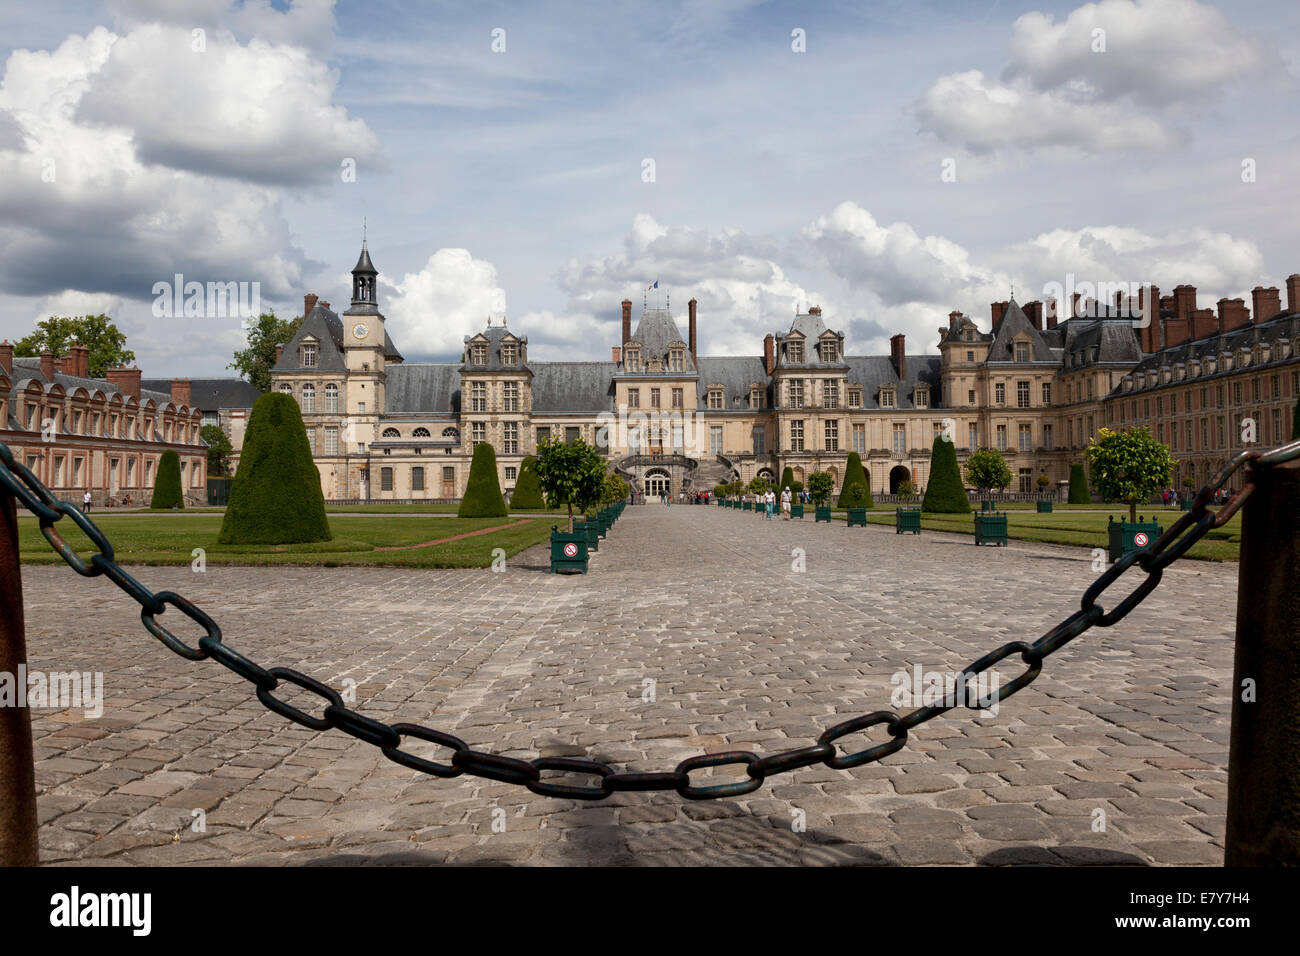 Entrance to palace Fontainebleau, France Stock Photo